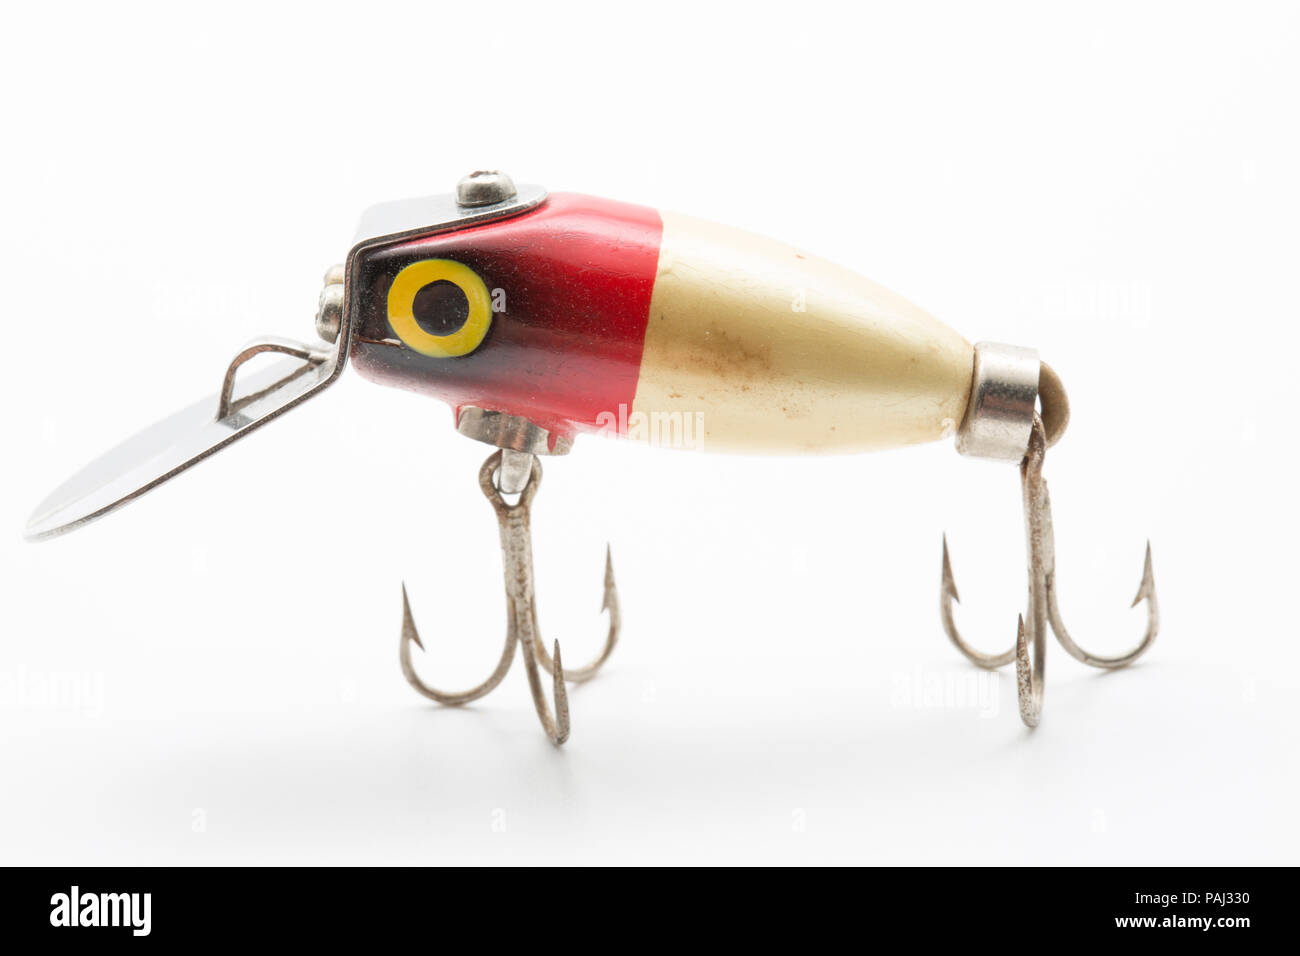 A single vintage fishing lure equipped with treble hooks, possibly